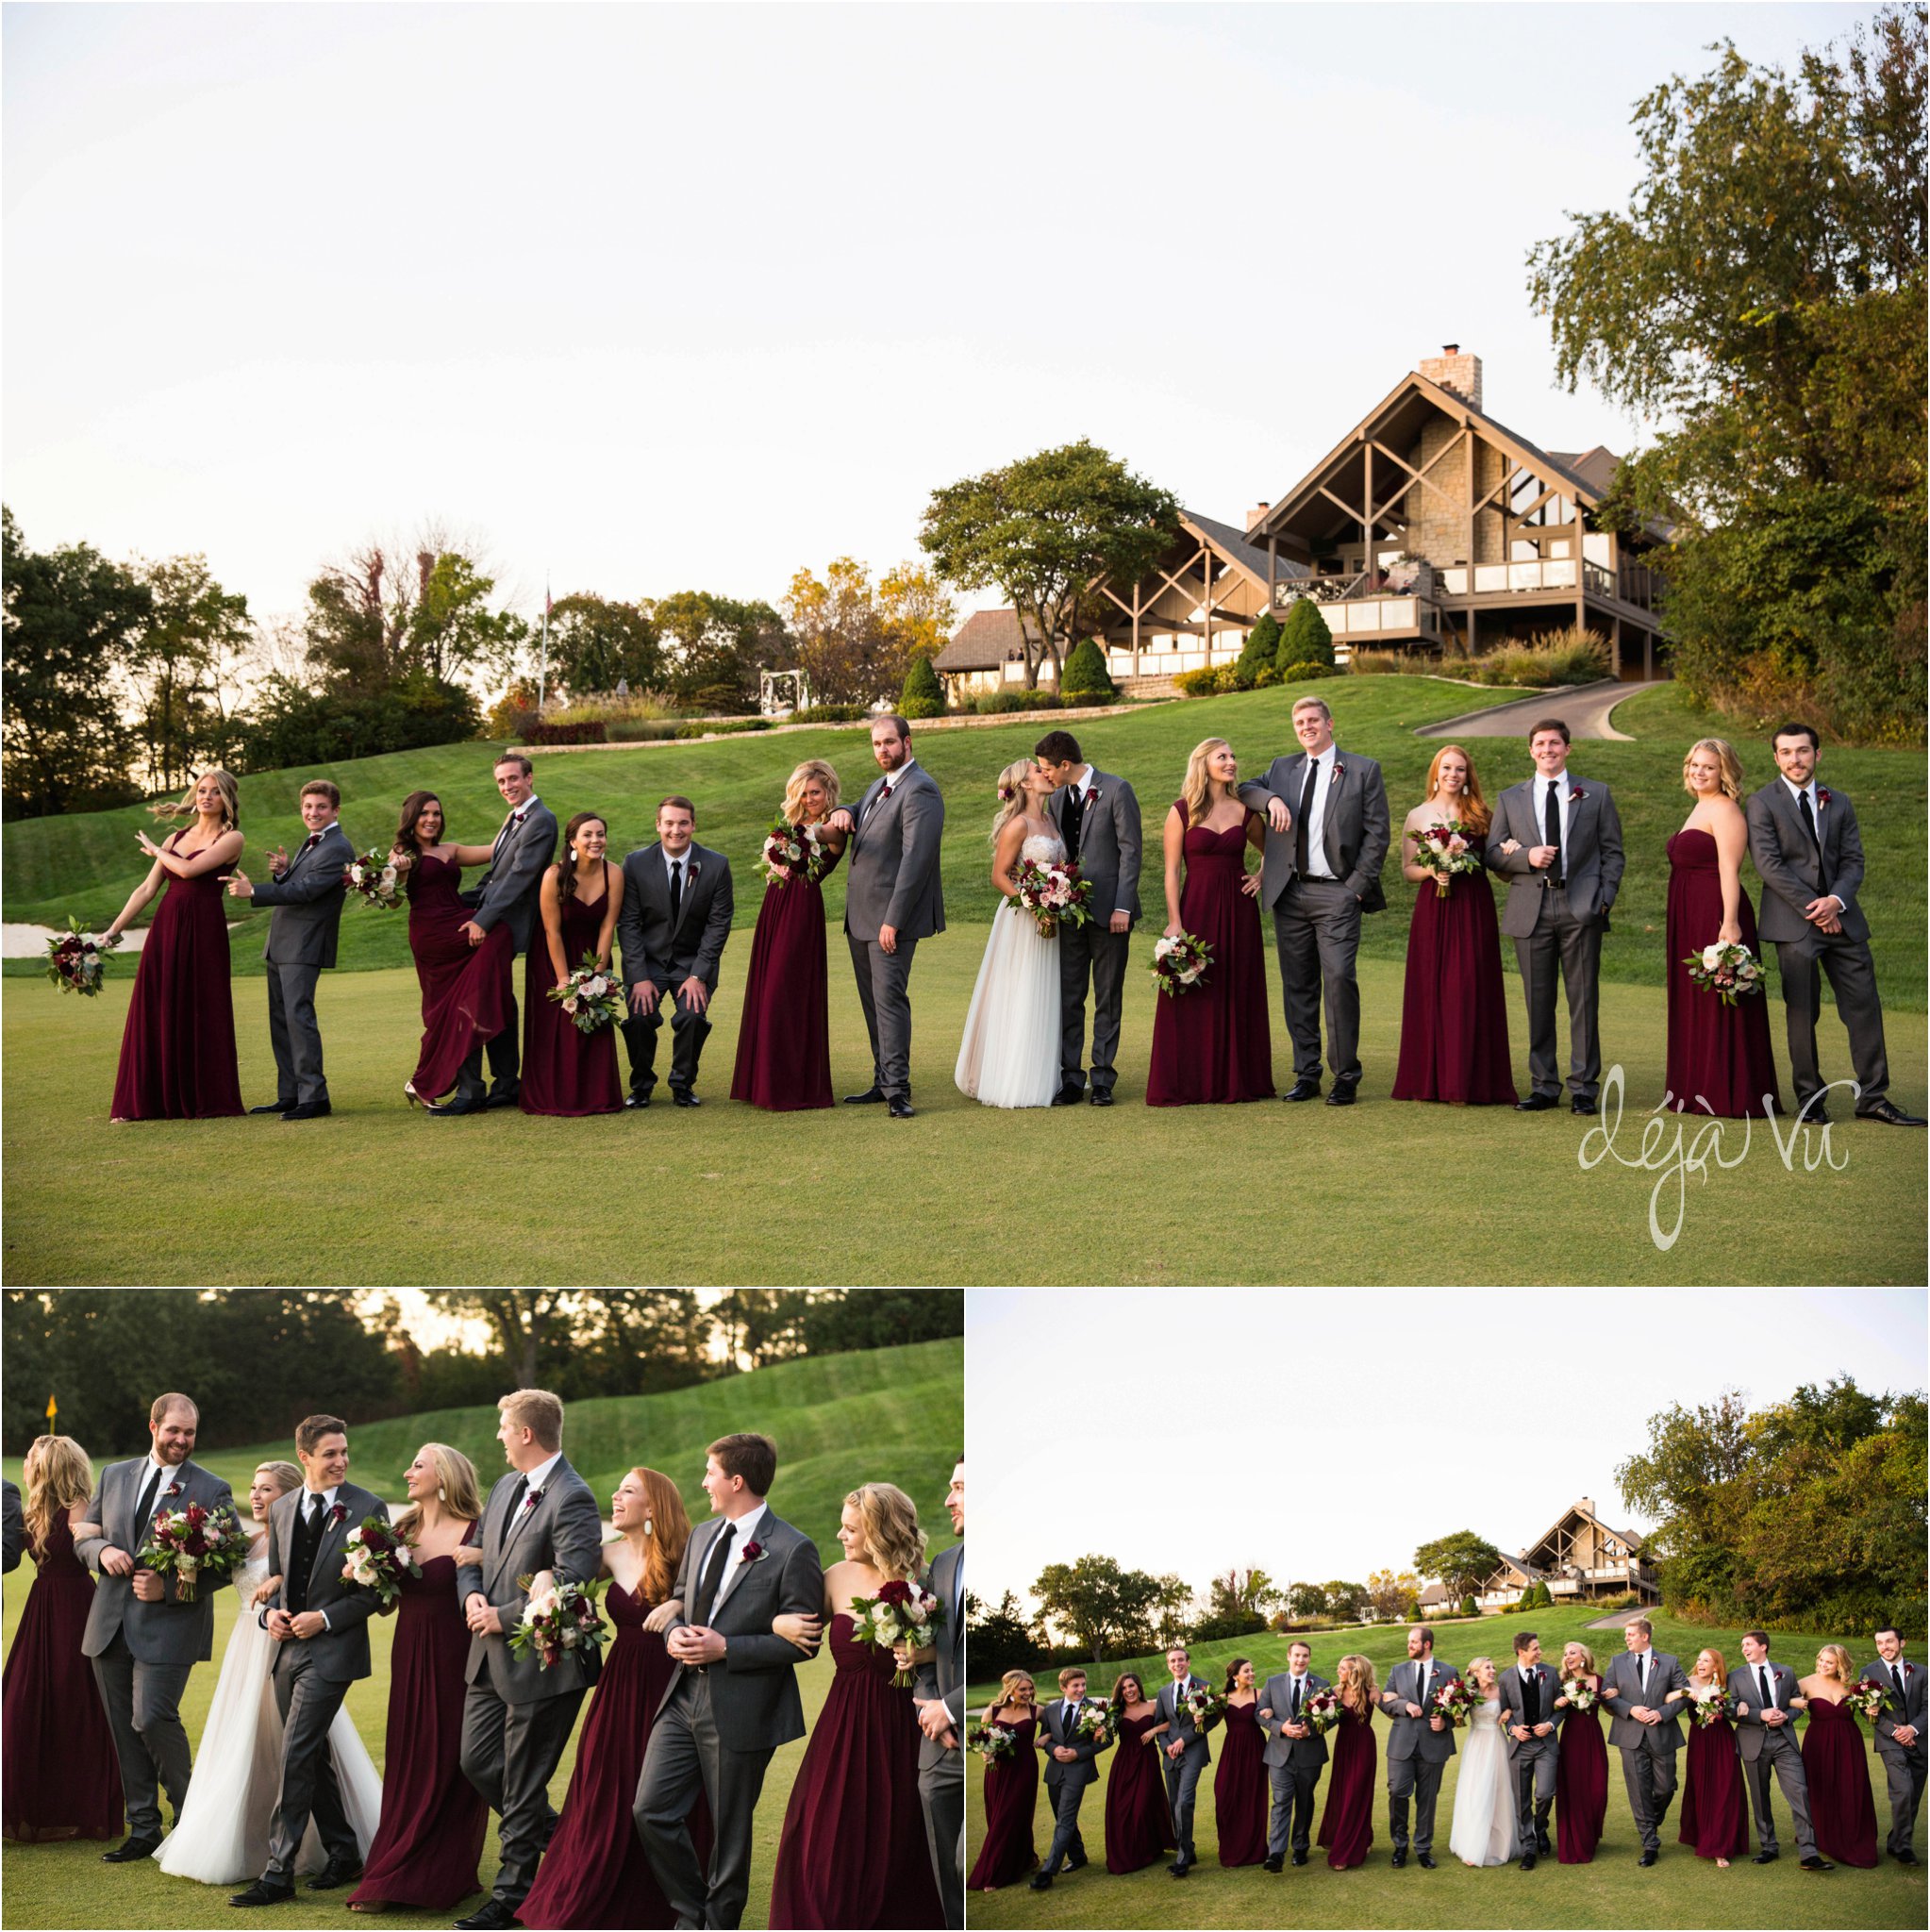 Shadow Glen Country Club Wedding | Bridal party walking | Images by: www.feliciathephotographer.com